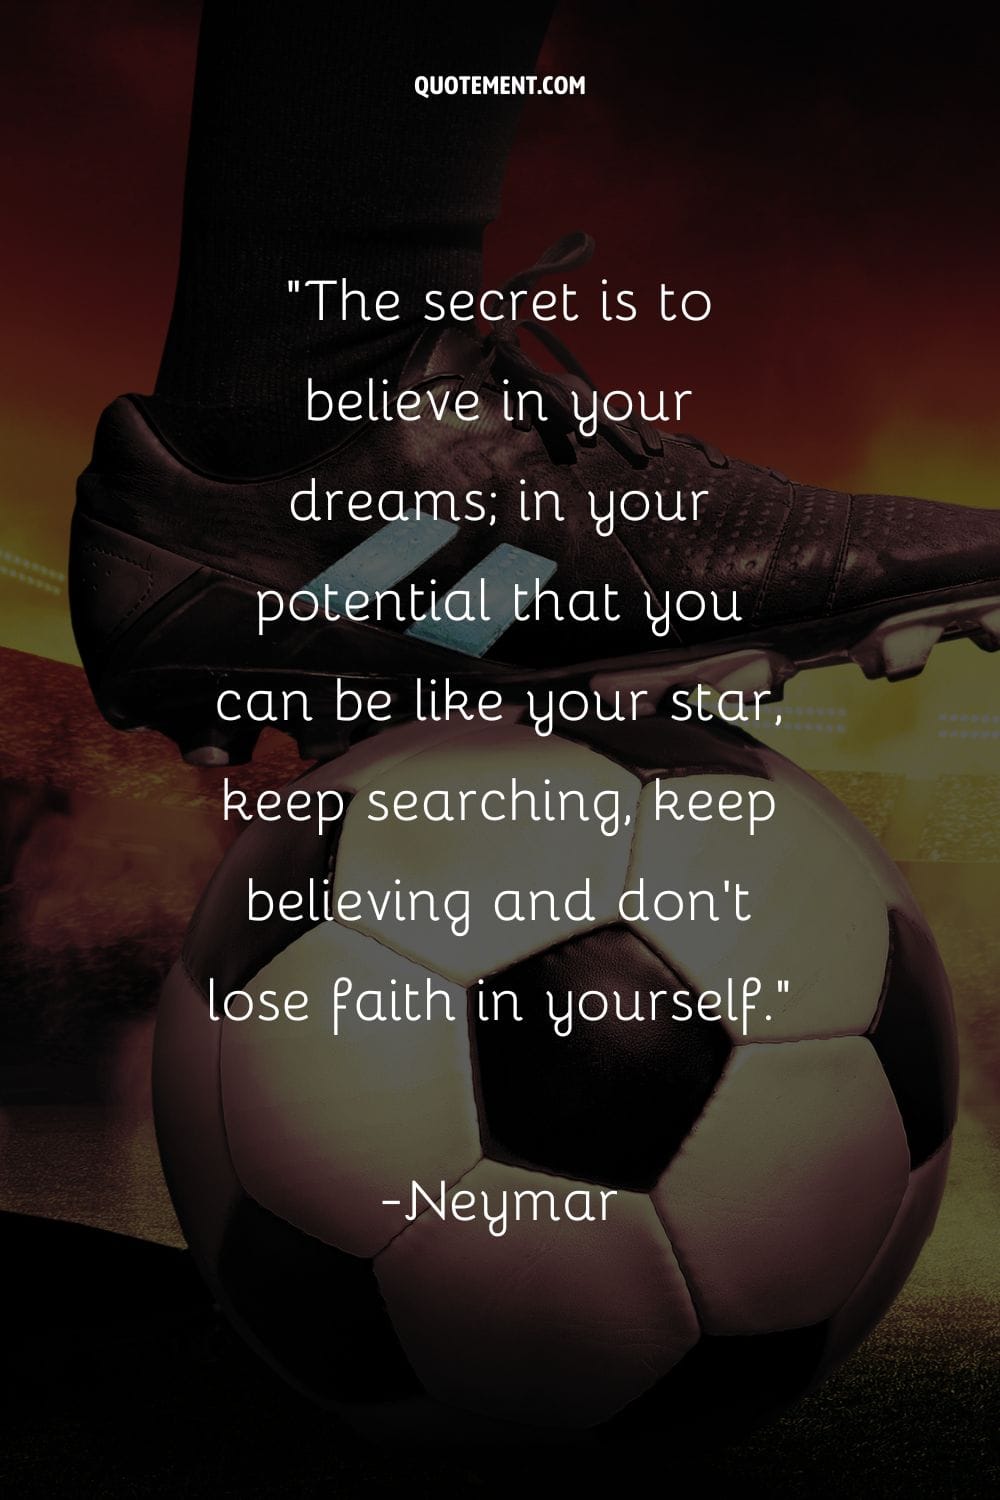 Striker's black cleats on the ball representing inspirational soccer quote